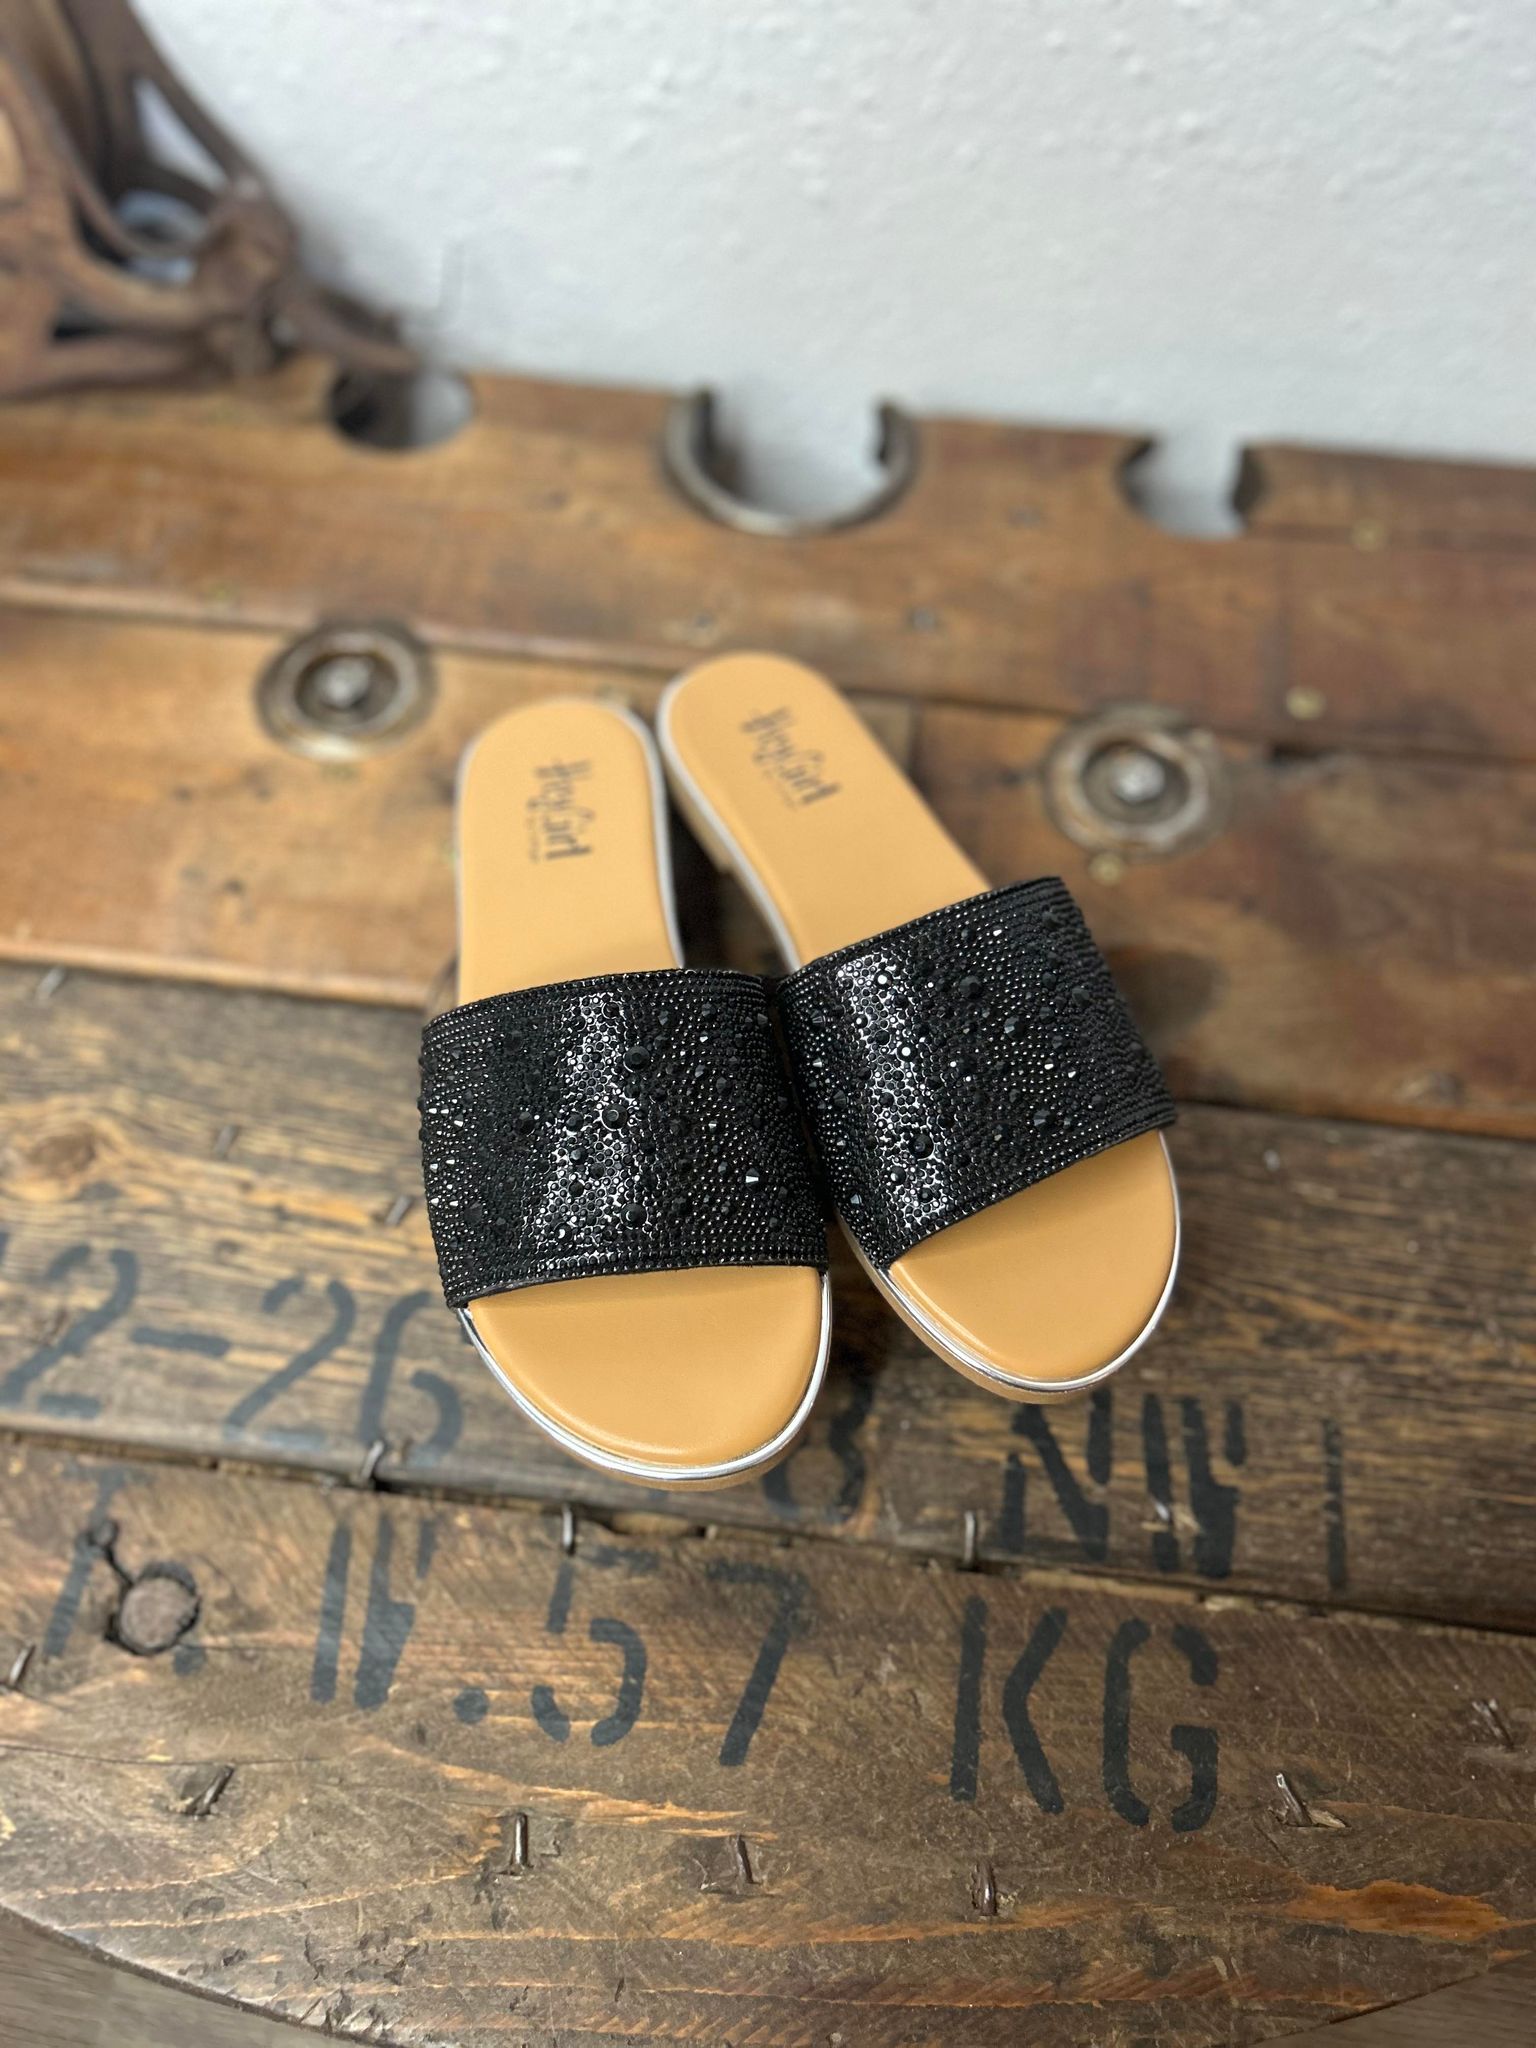 Corkys Pizzazz Sandals in Black Rhinestones-Sandals-Corkys Footwear-Lucky J Boots & More, Women's, Men's, & Kids Western Store Located in Carthage, MO